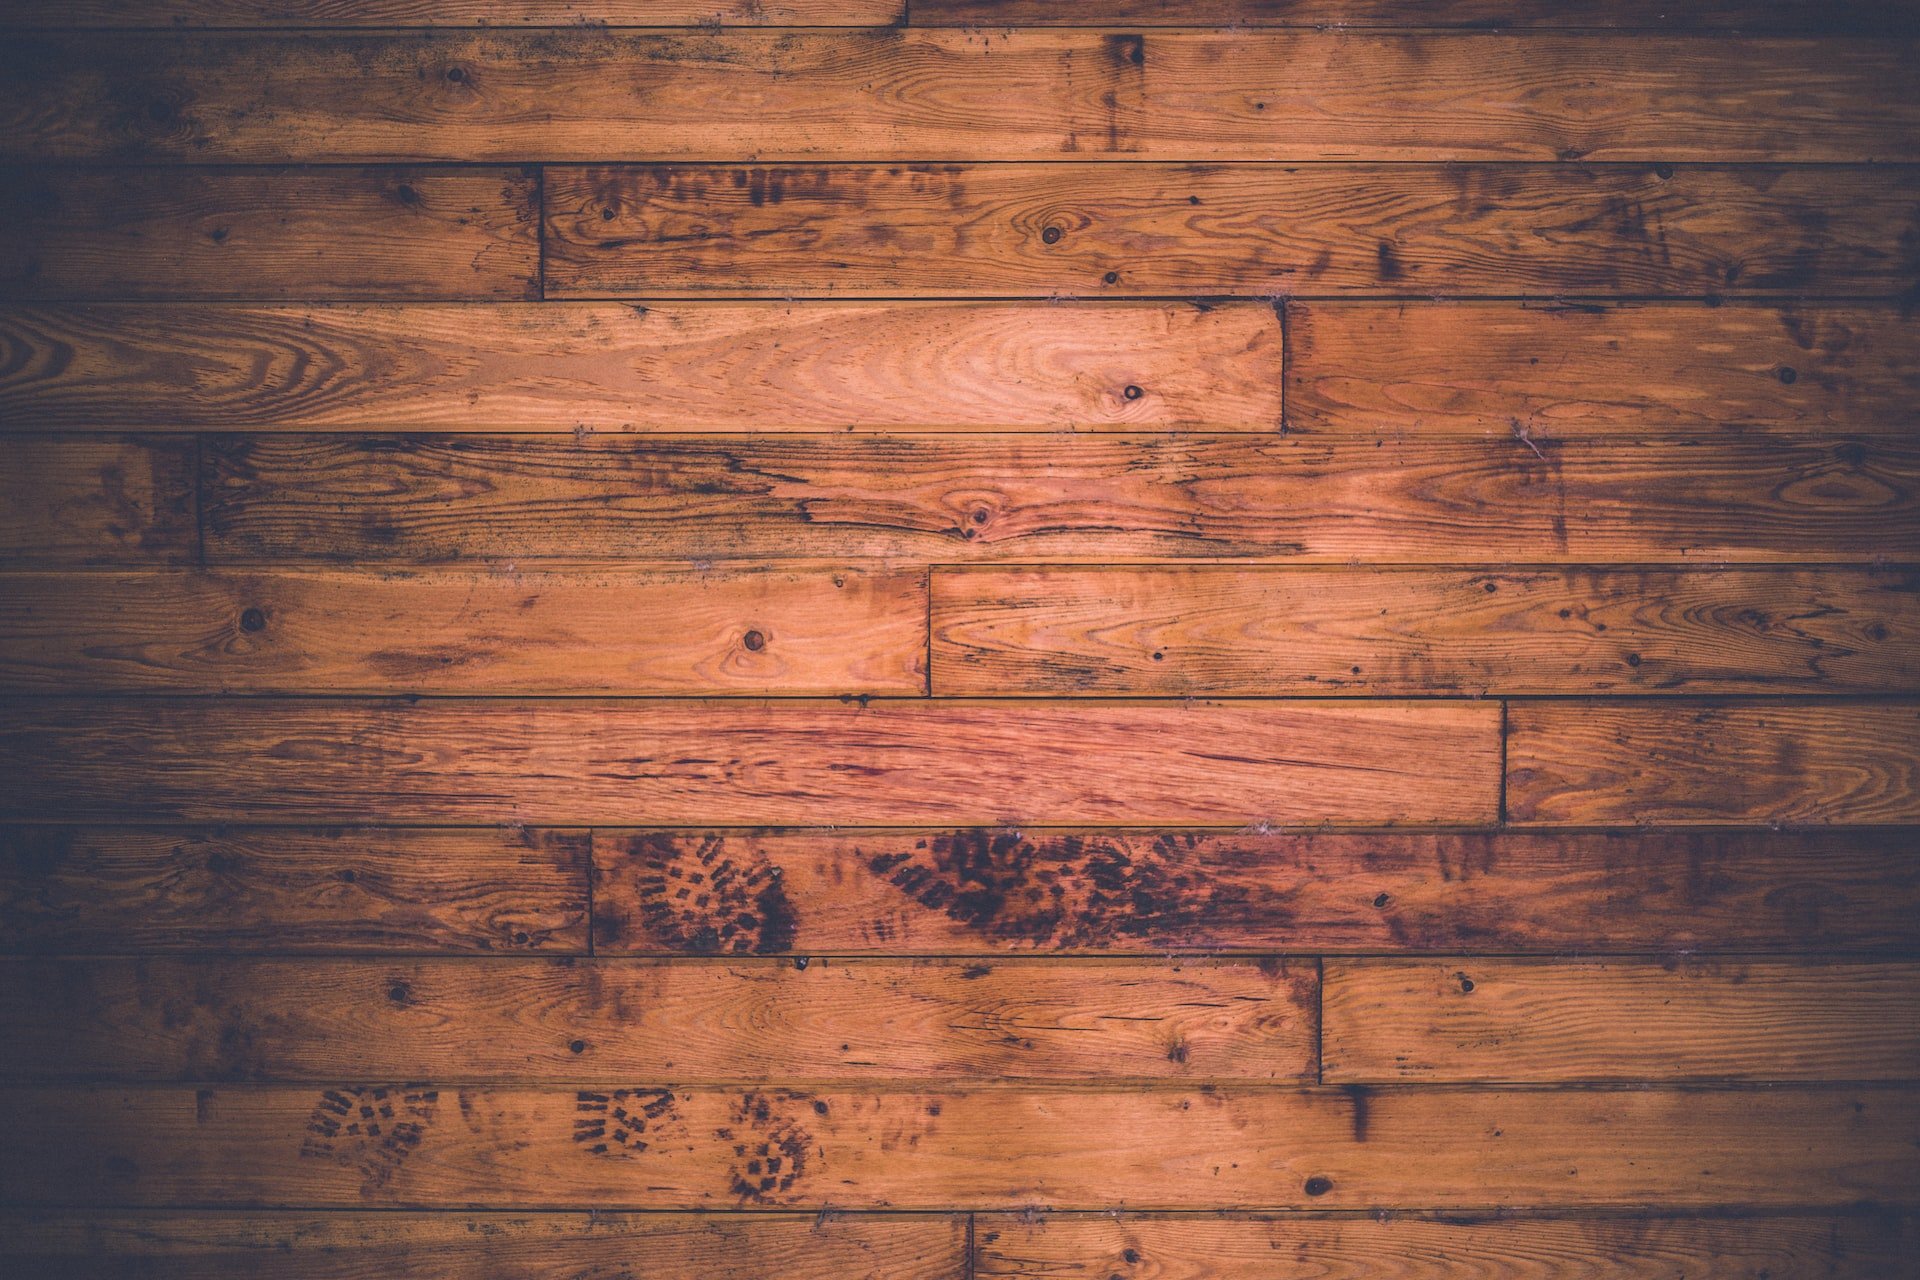 What Are the Common Characteristics of an Ipe Wood Tile?